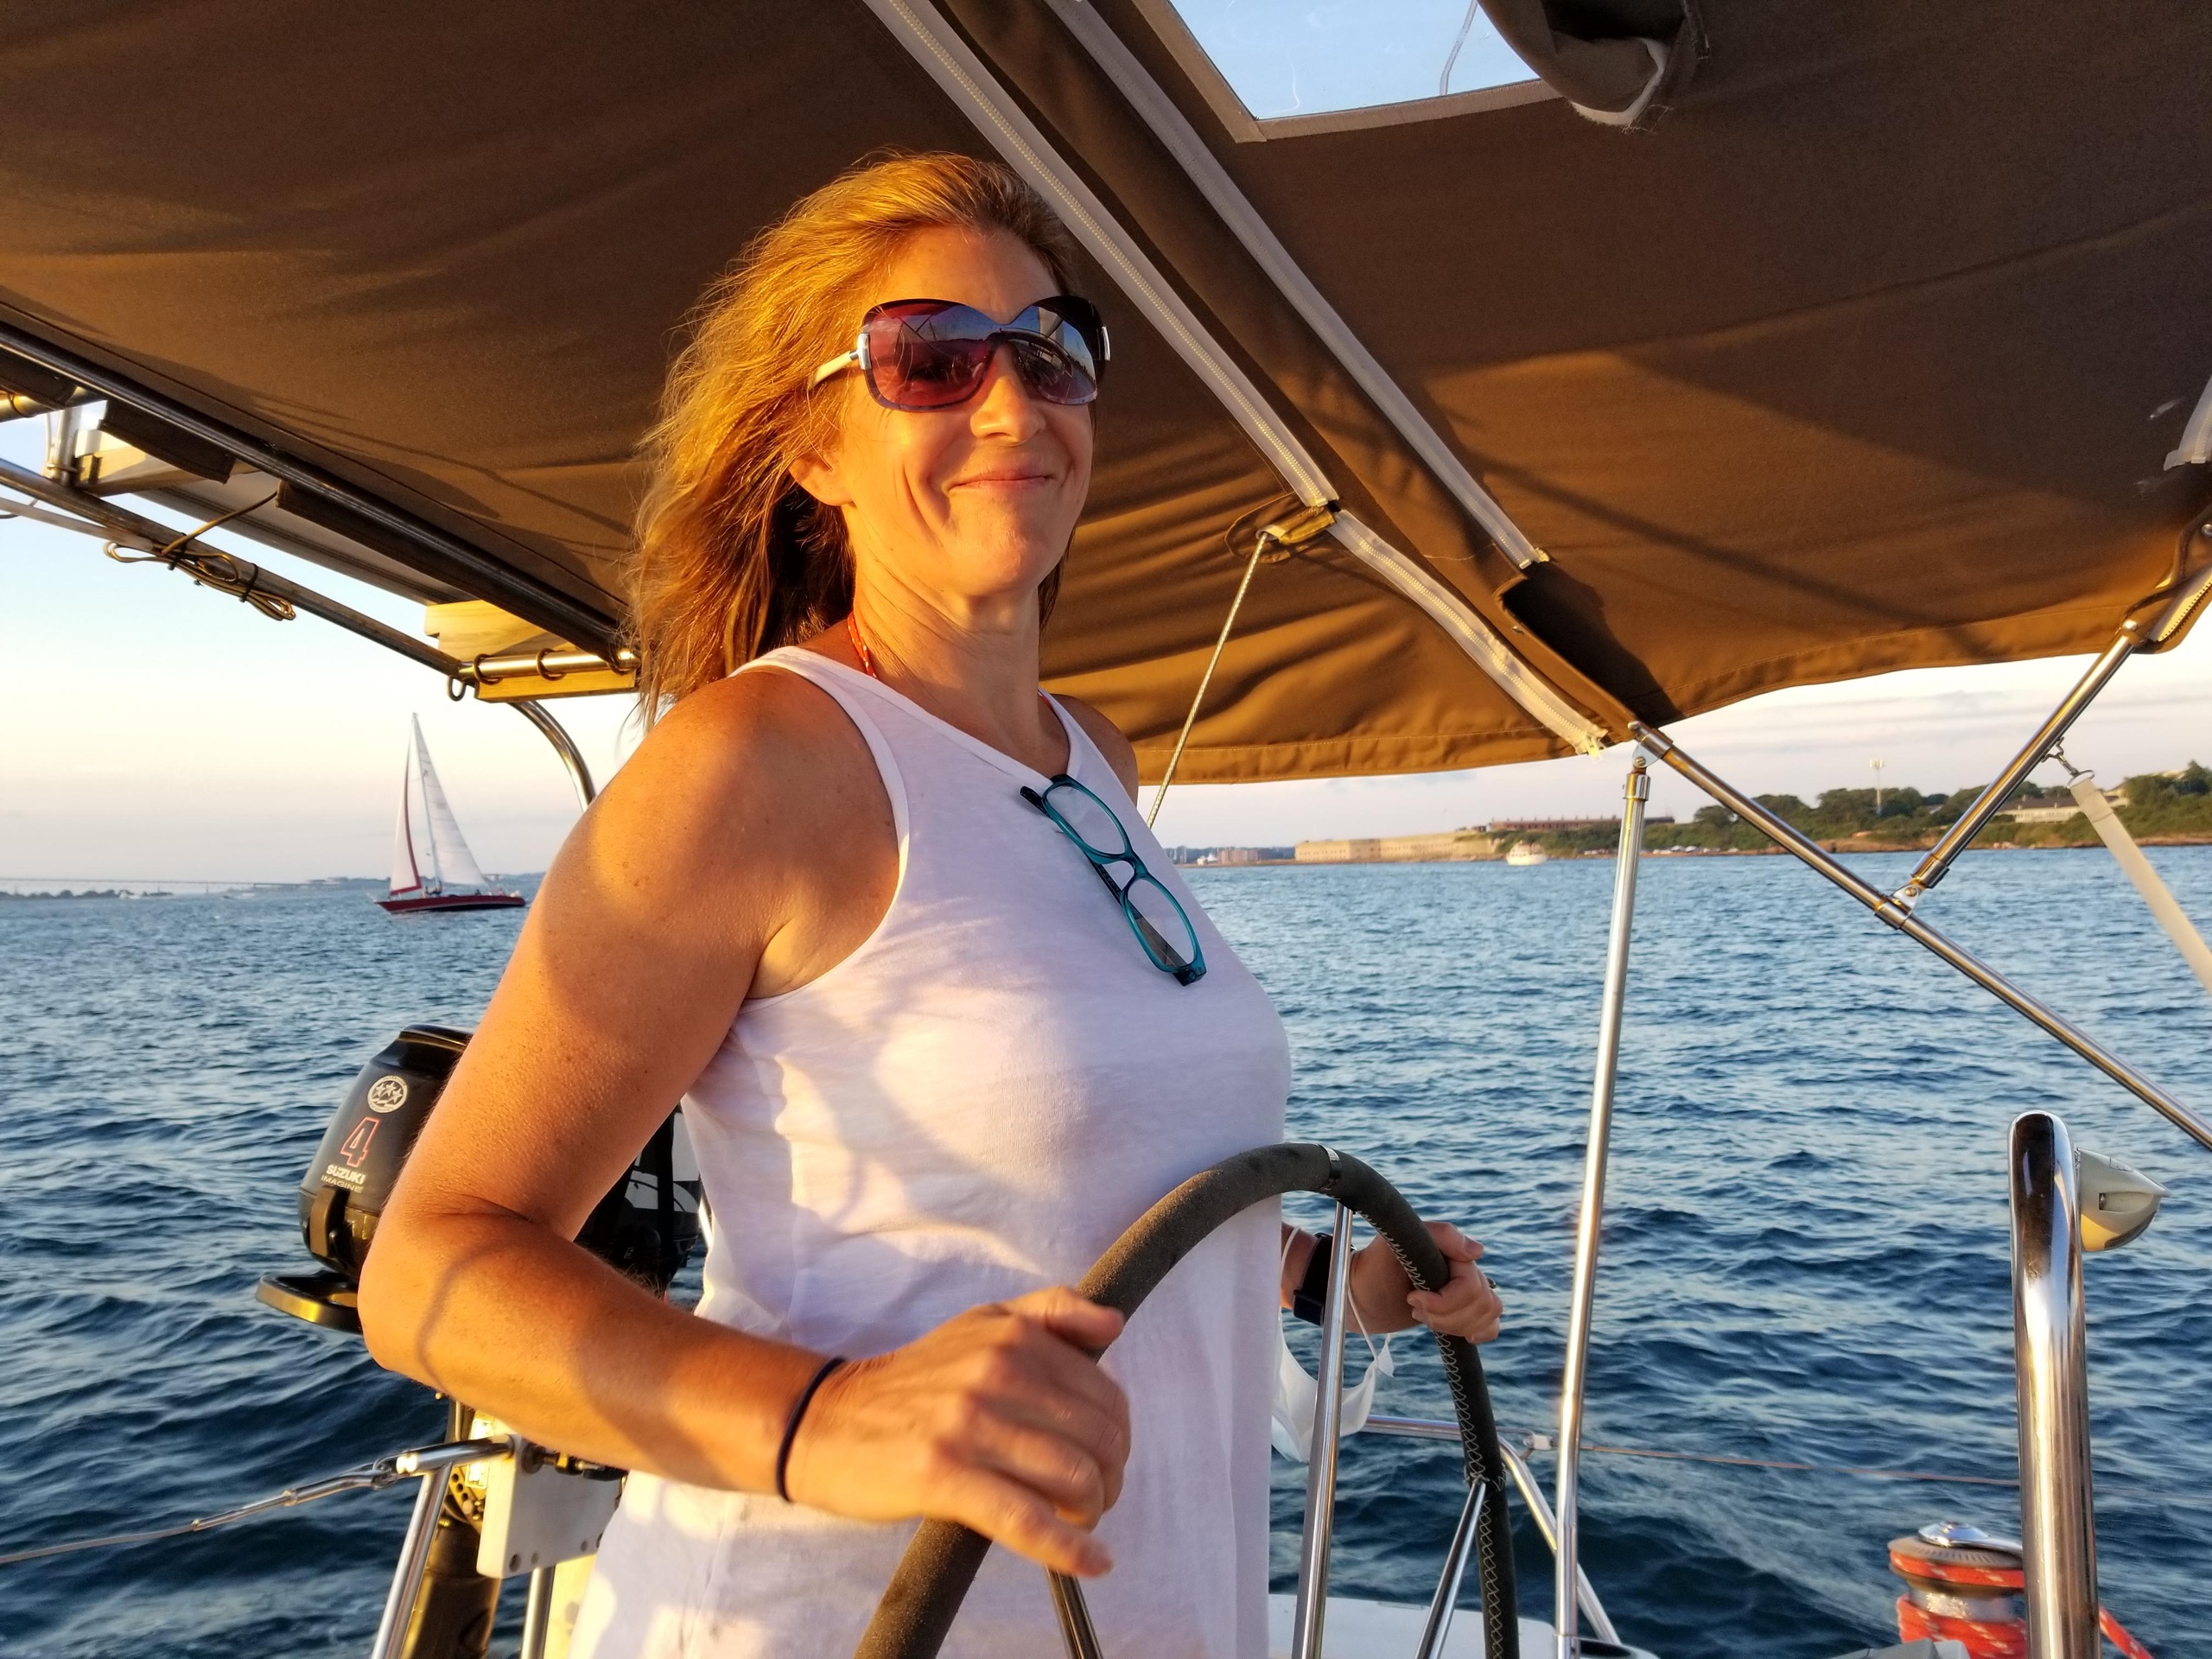 Private Sunset Sailing Tour in Newport